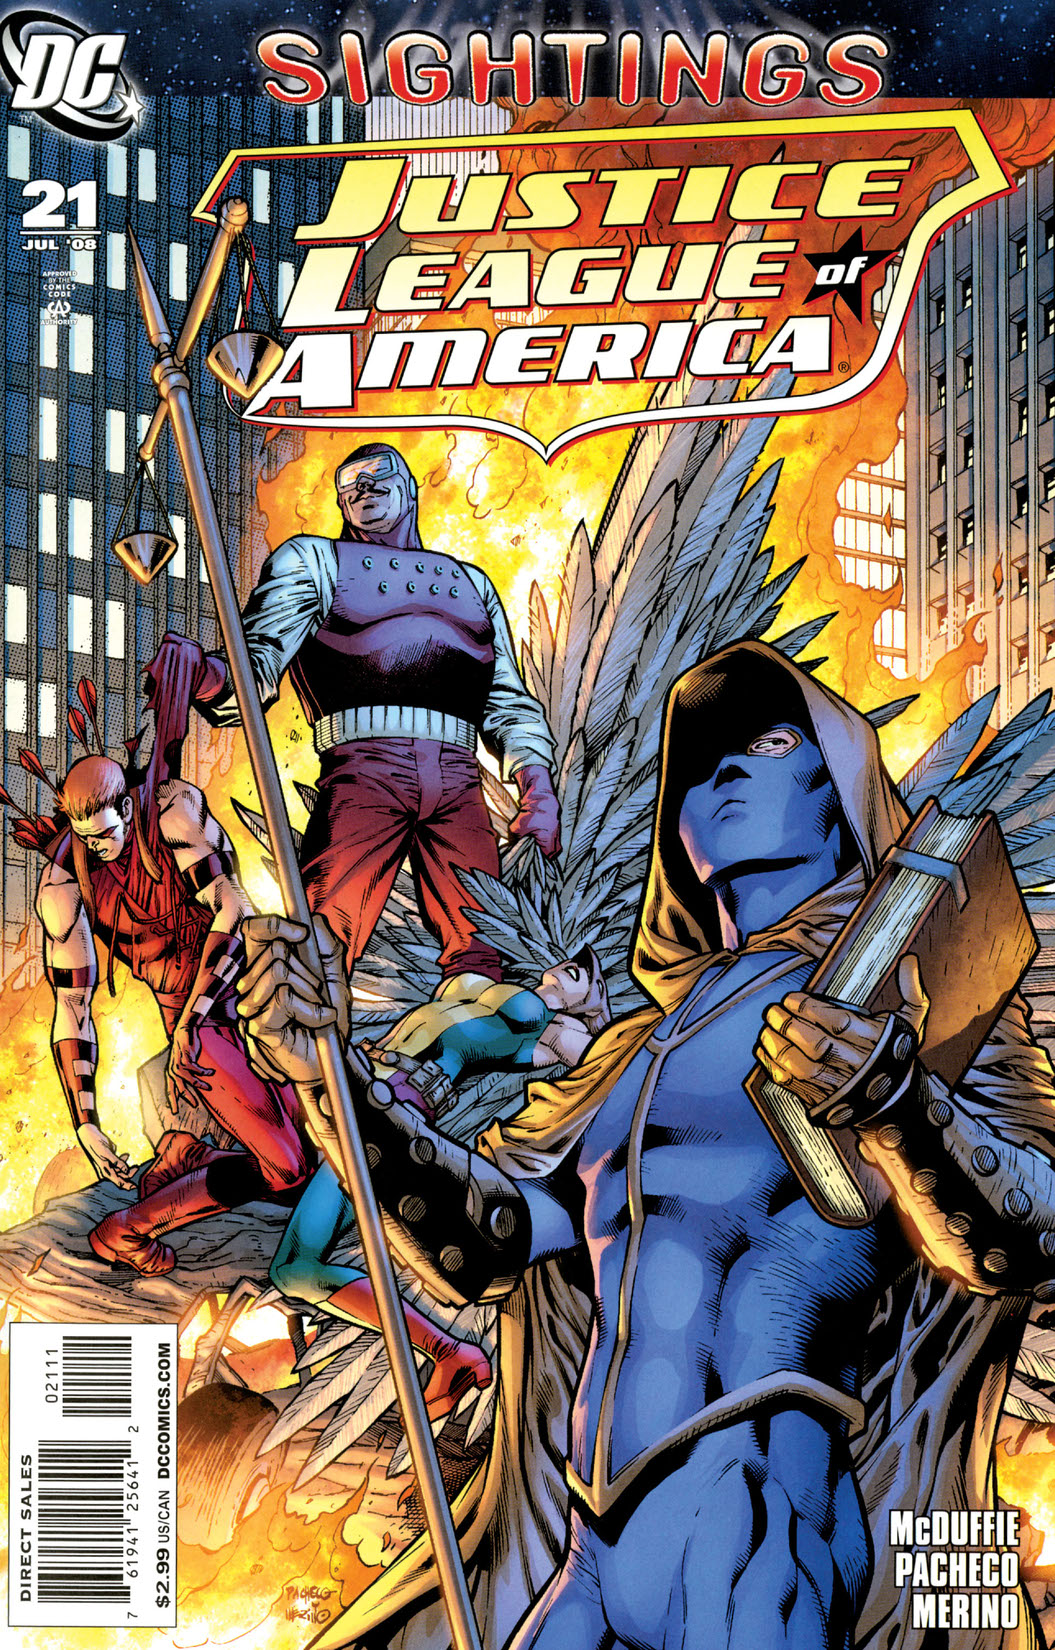 Justice League of America (2006-) #21 preview images